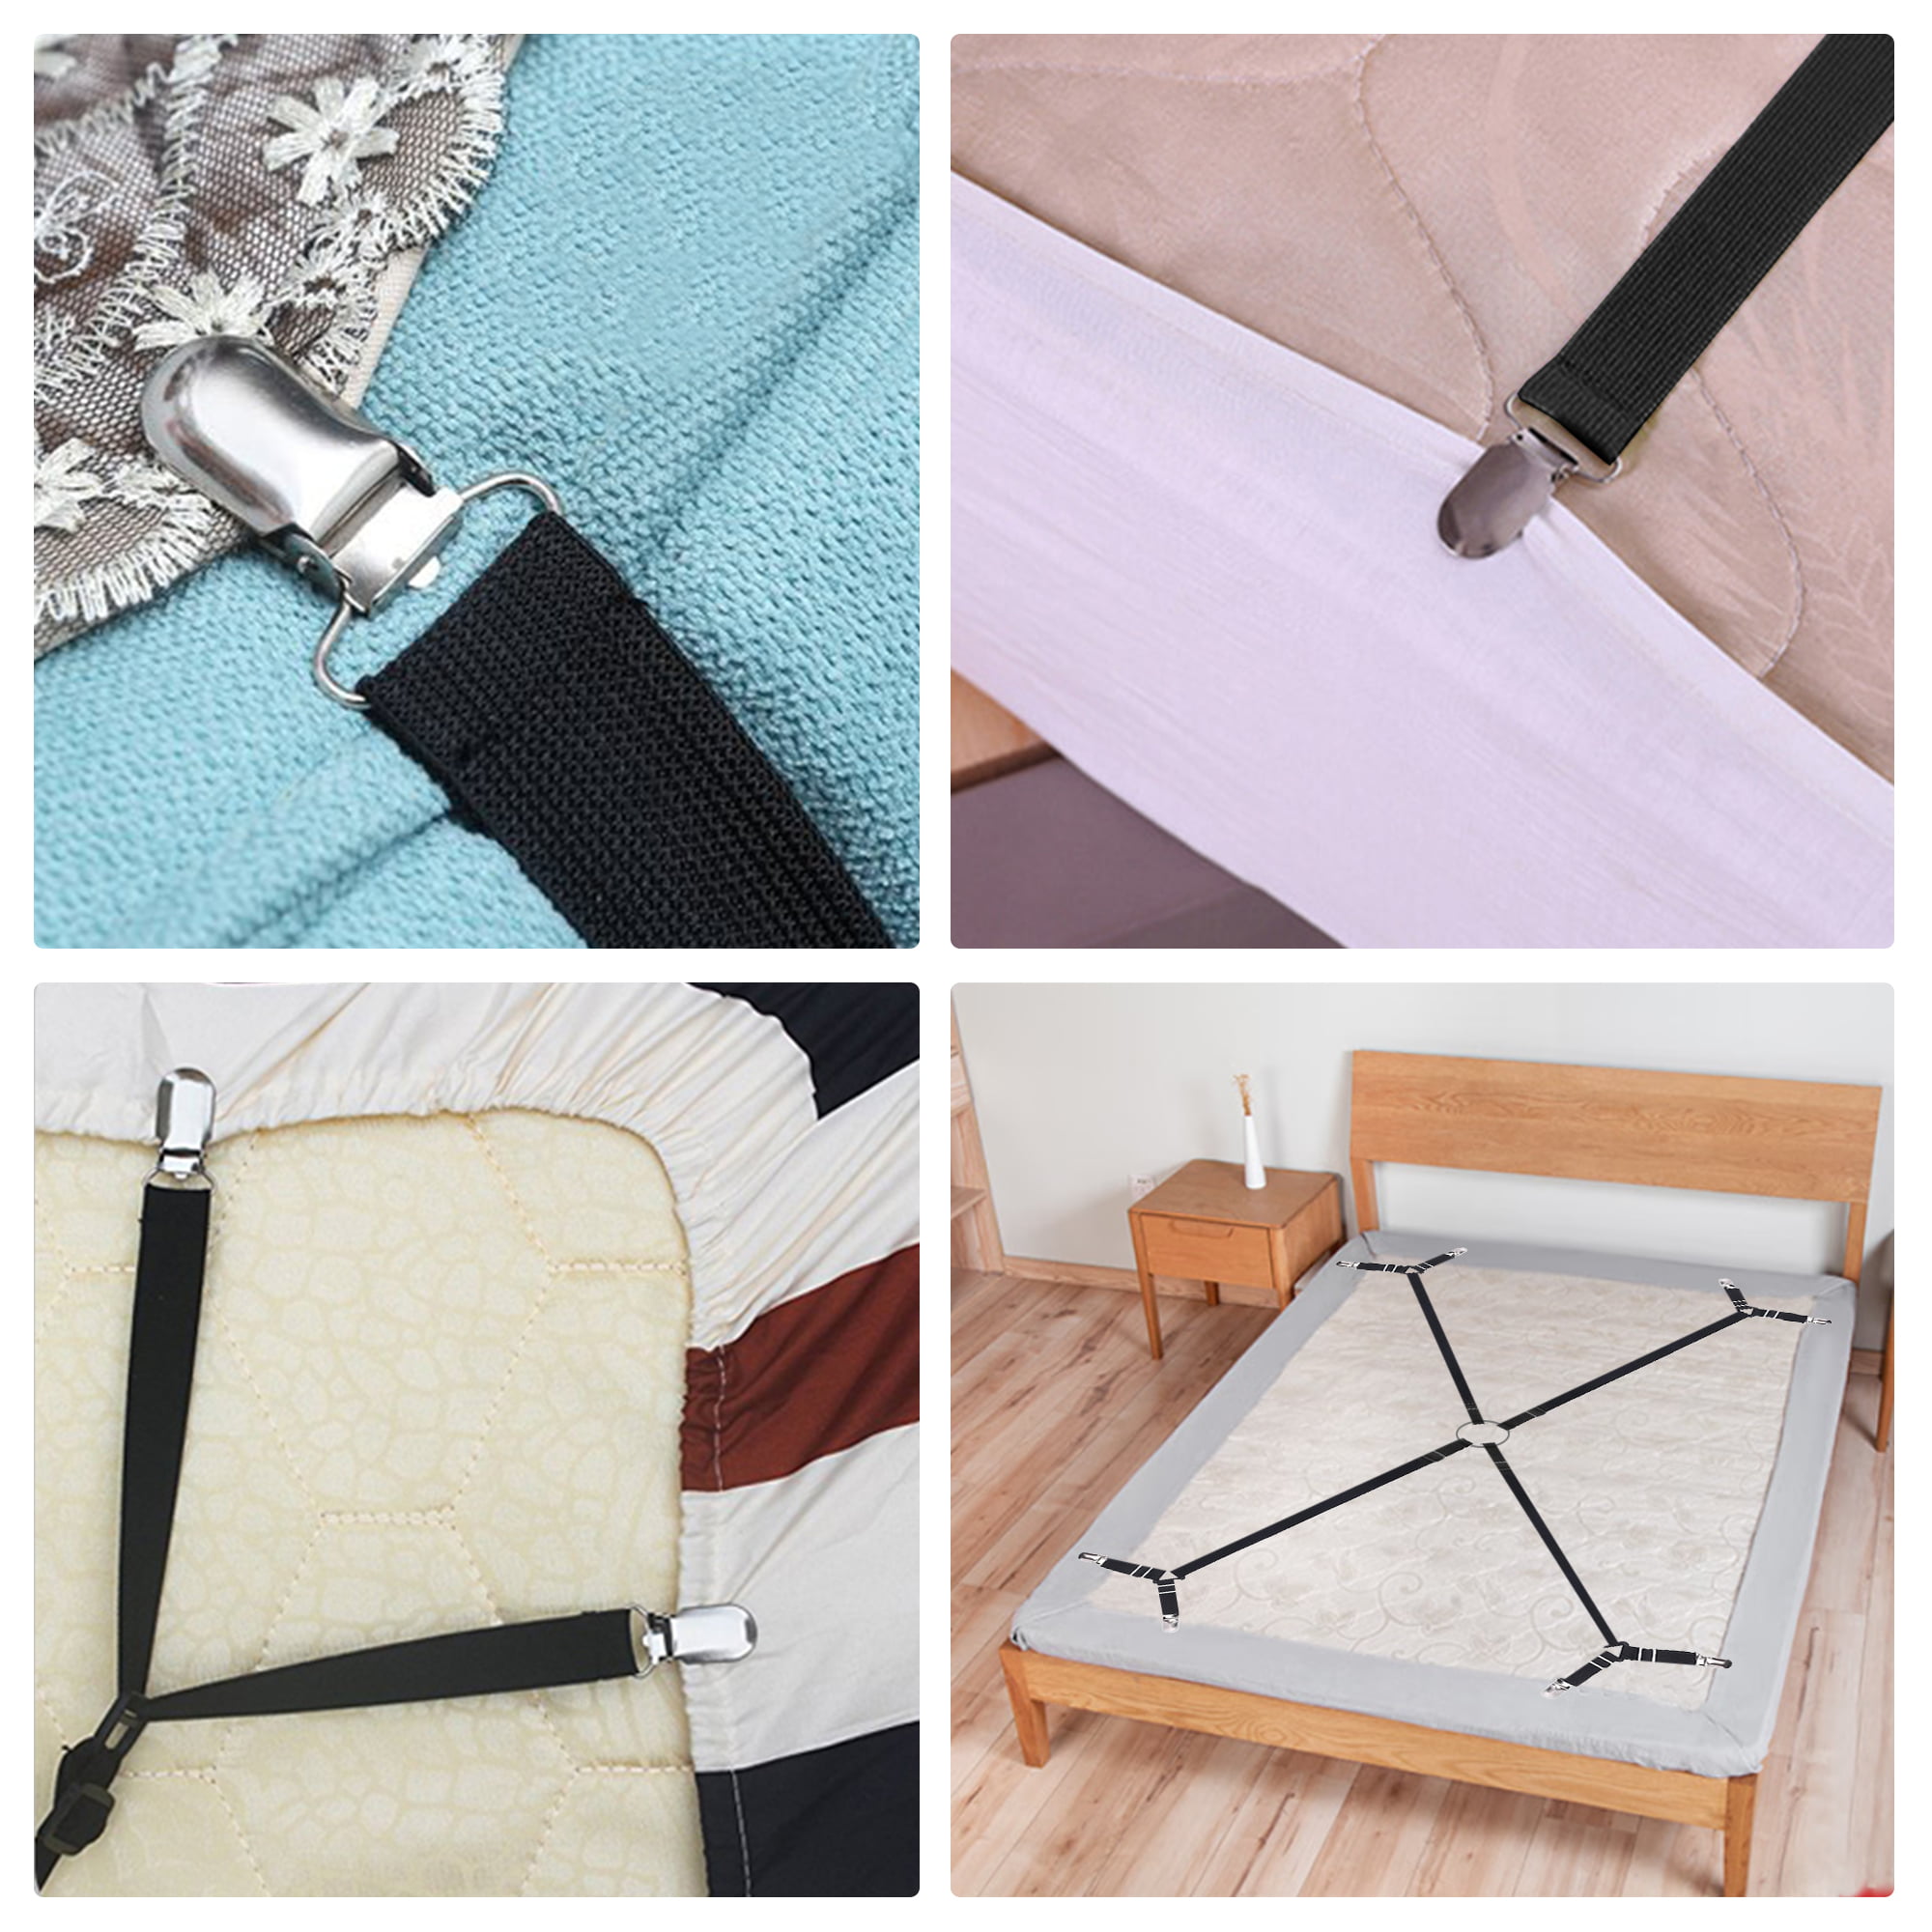 Adjustable Elastic Mattress Cover Corner Holder Clip Bed Sheet Self  Clinching Fasteners Straps Grippers Suspender Cord Hook Loo JllxsV From  Yummy_shop, $2.62